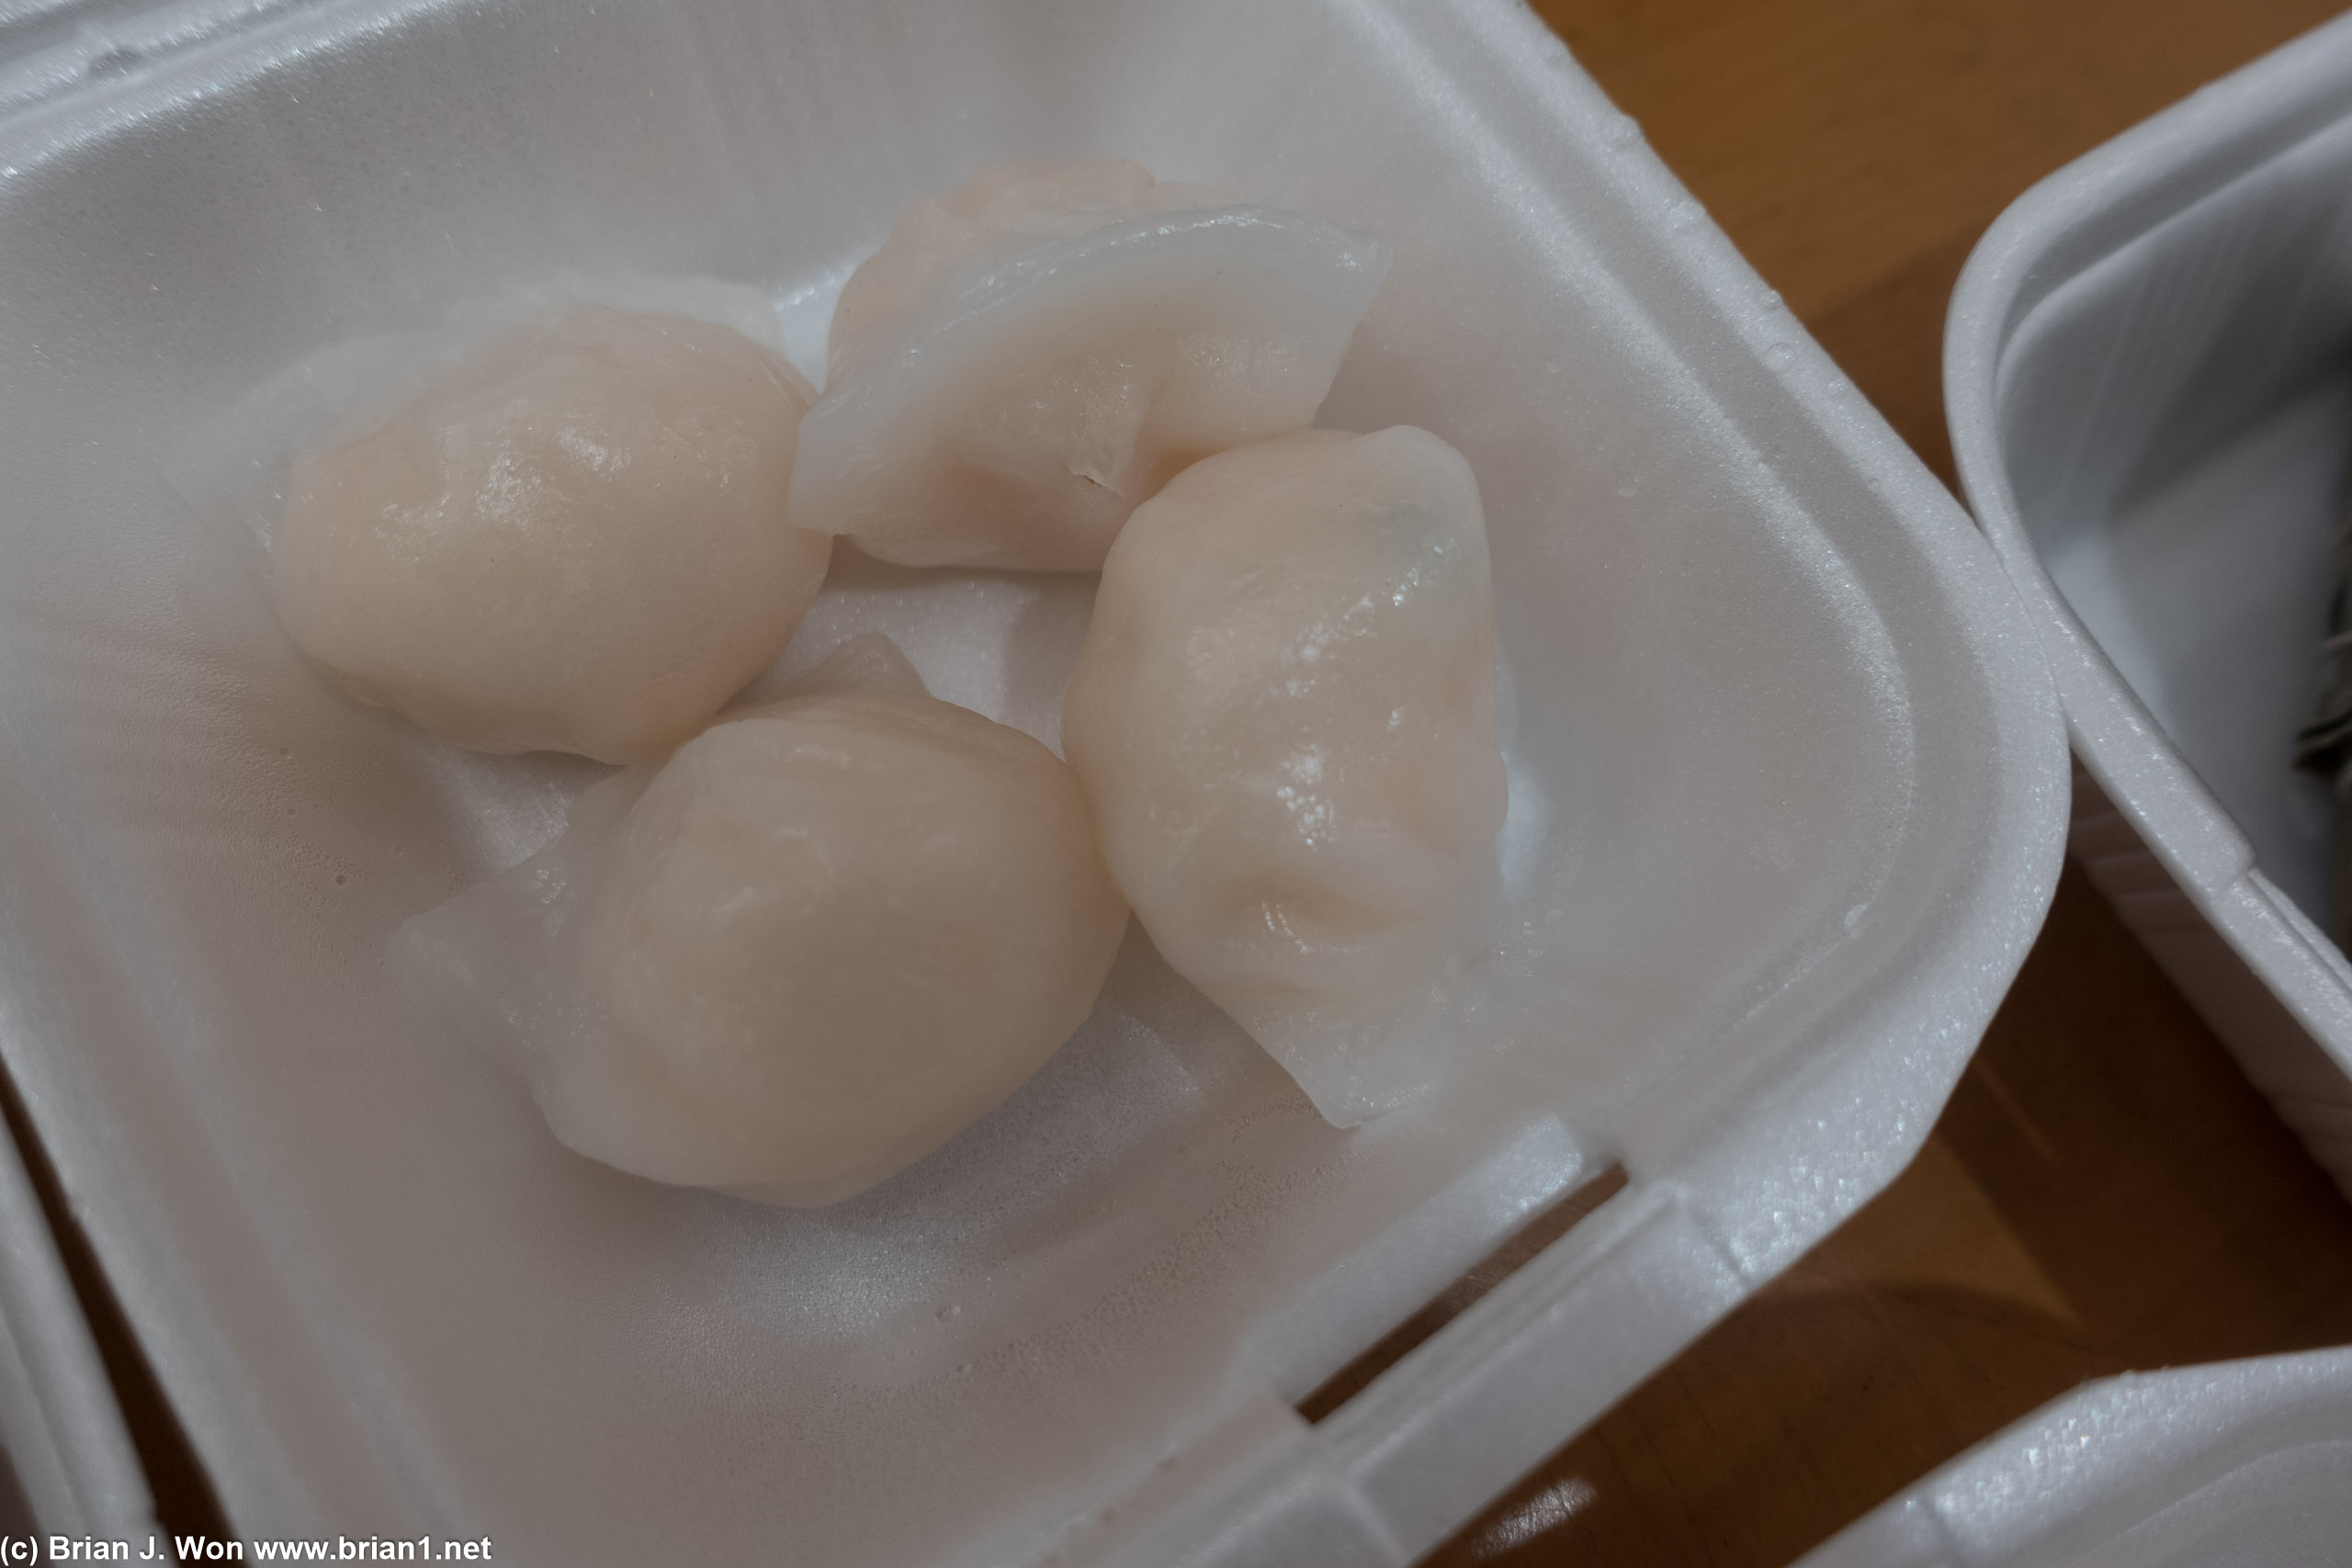 Har gow were entirely forgettable.